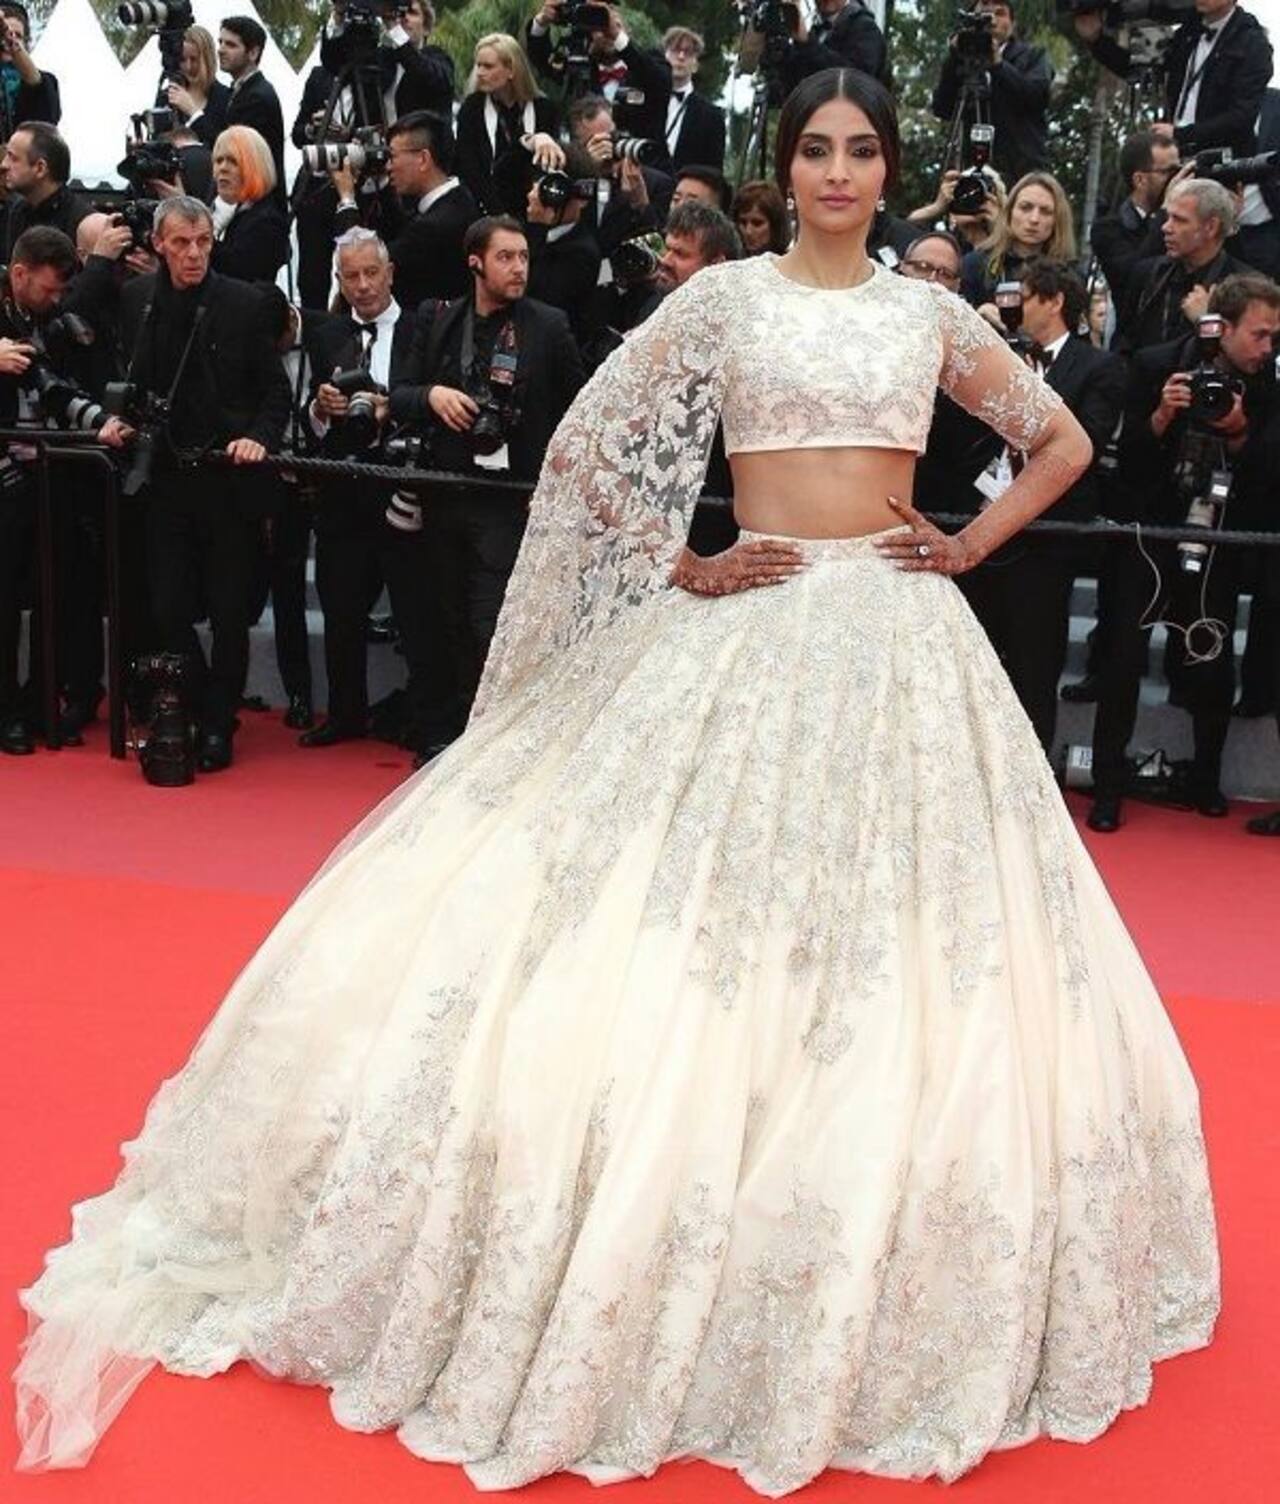 [Pics] Sonam Kapoor in a Ralph & Russo number at the red carpet of Cannes Film Festival is elegance personified